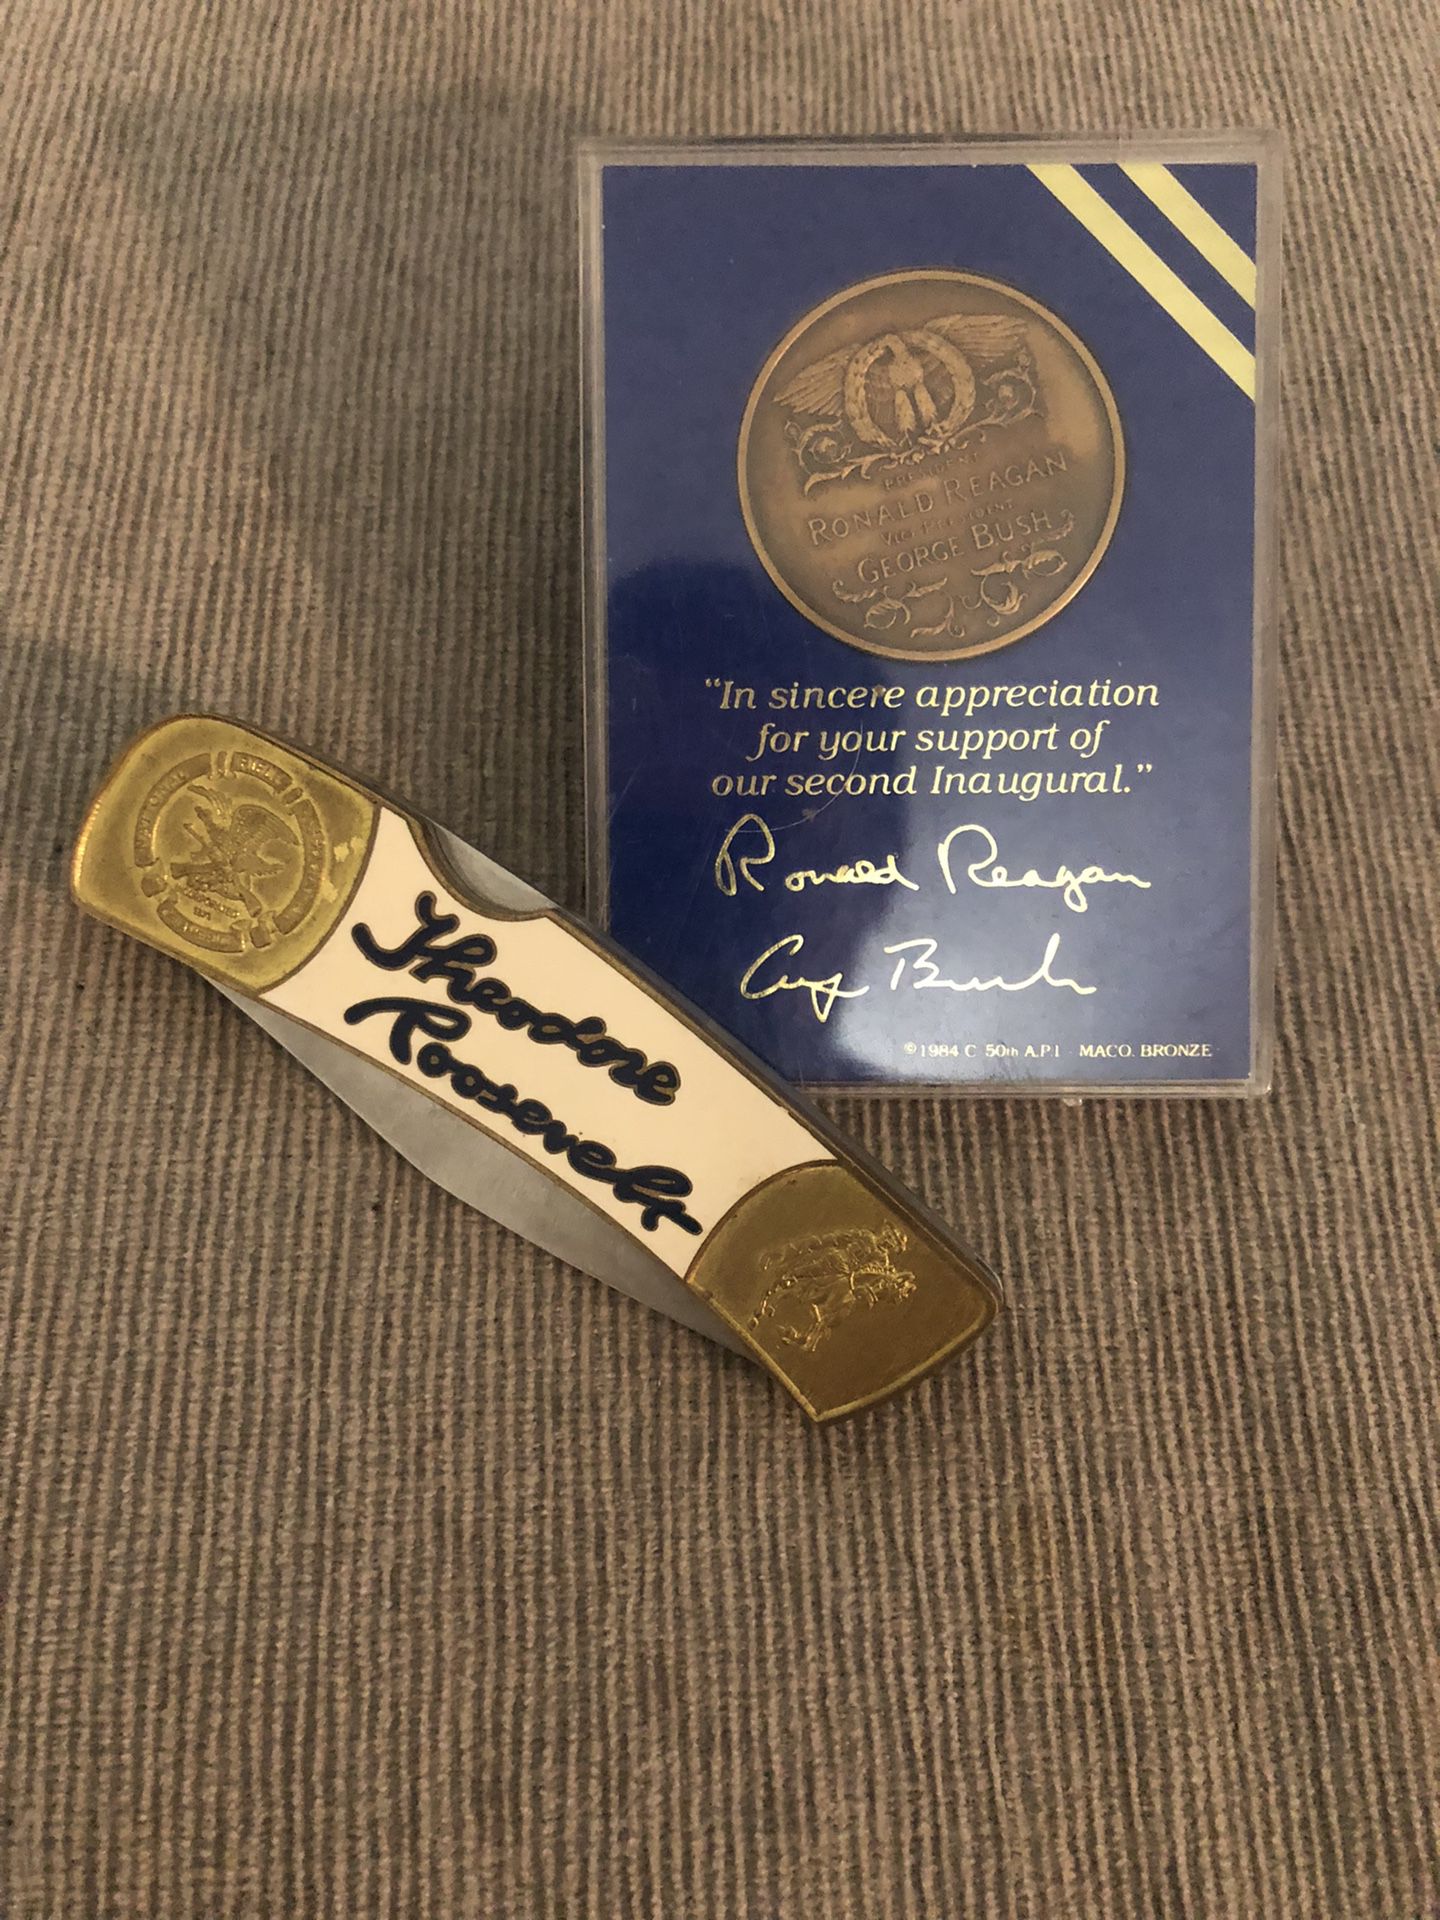 Ronald Reagan And George Bush Inaugural Coin And NRA Limited Edition Teddy Roosavelt Folding Knife